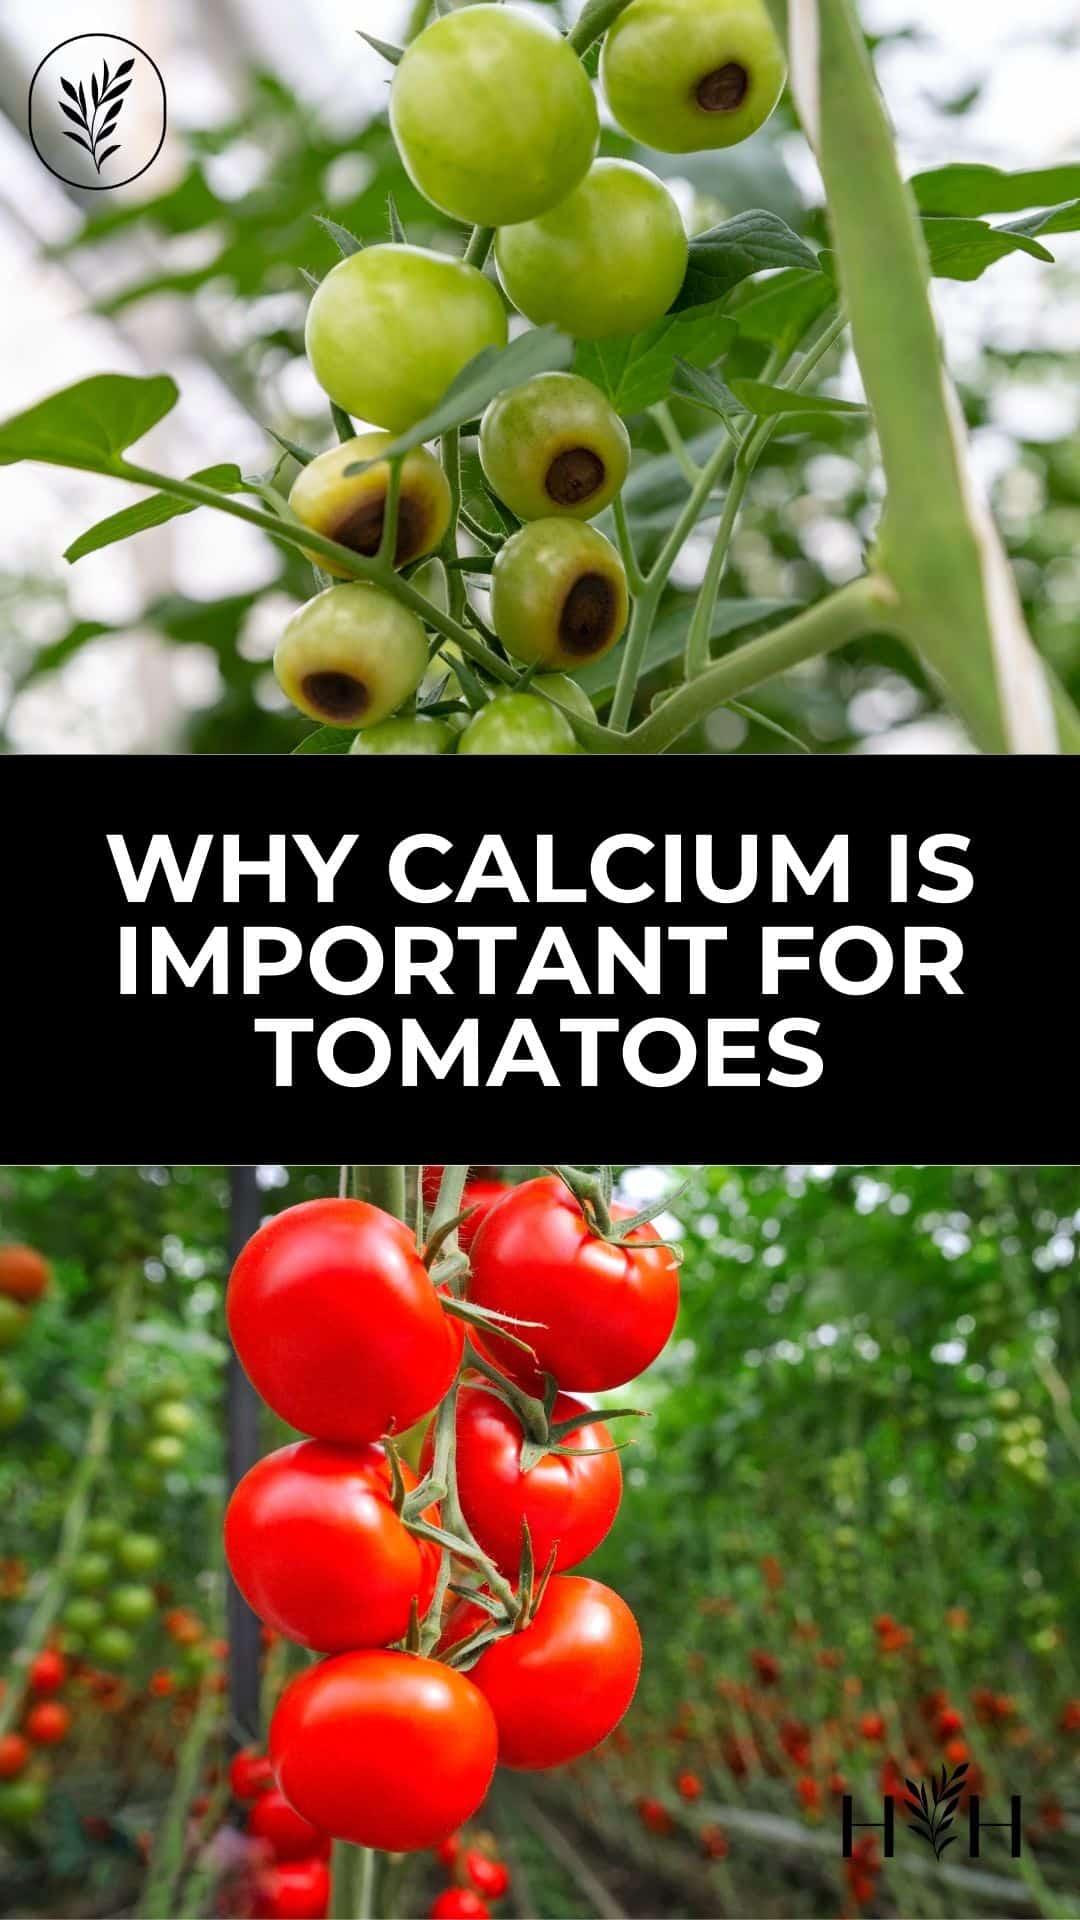 Why calcium is important for tomatoes via @home4theharvest